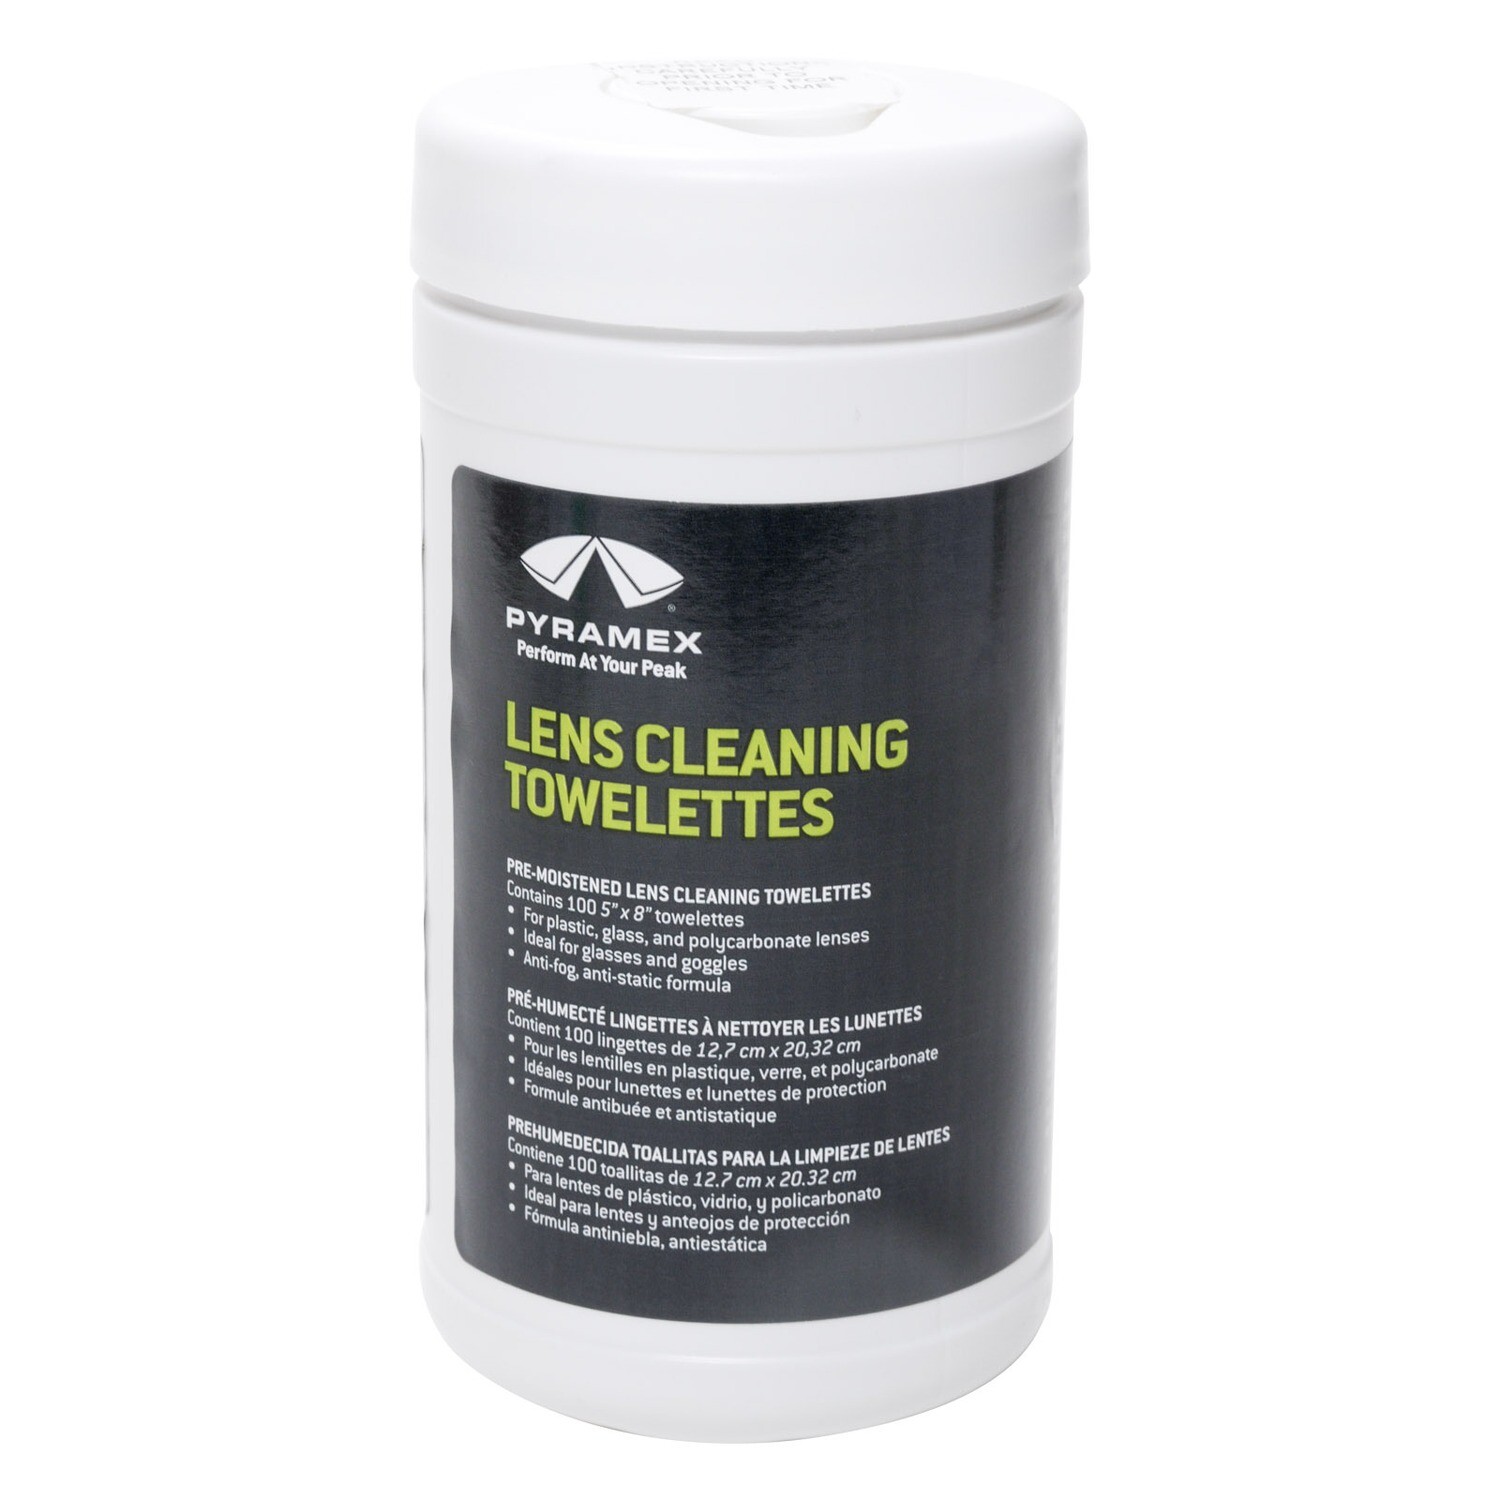 Pyramex Lens Cleaning Tissues - 100 Count Canister